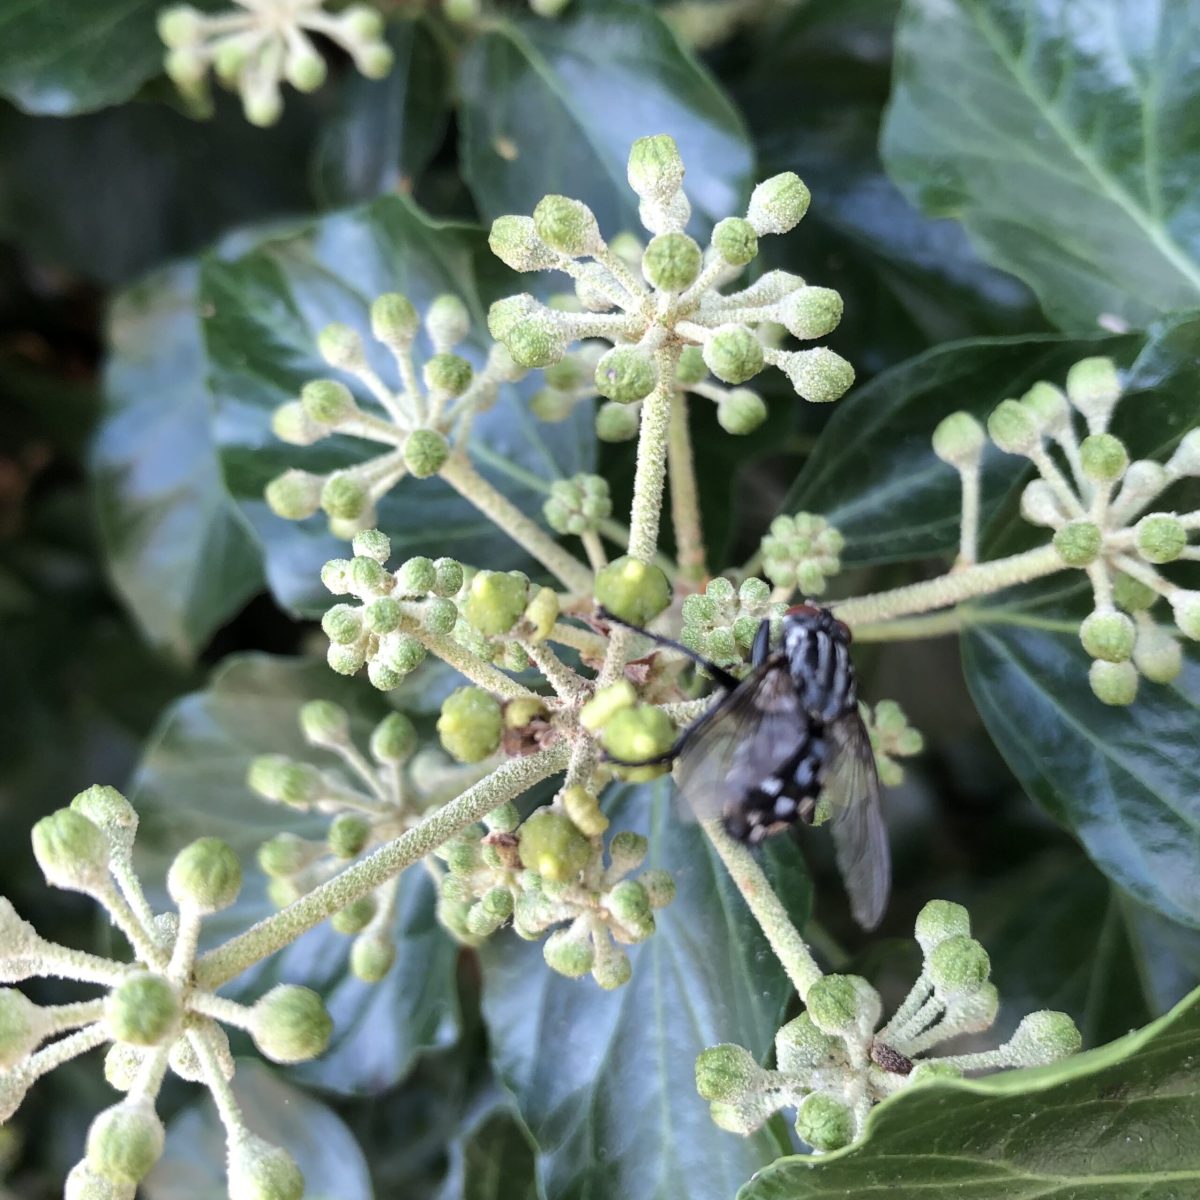 Common flesh Fly,Sarcophaga carnaria, 3.9.23, Thorne Rd, SE605055 on Ivy by Nora Boyle